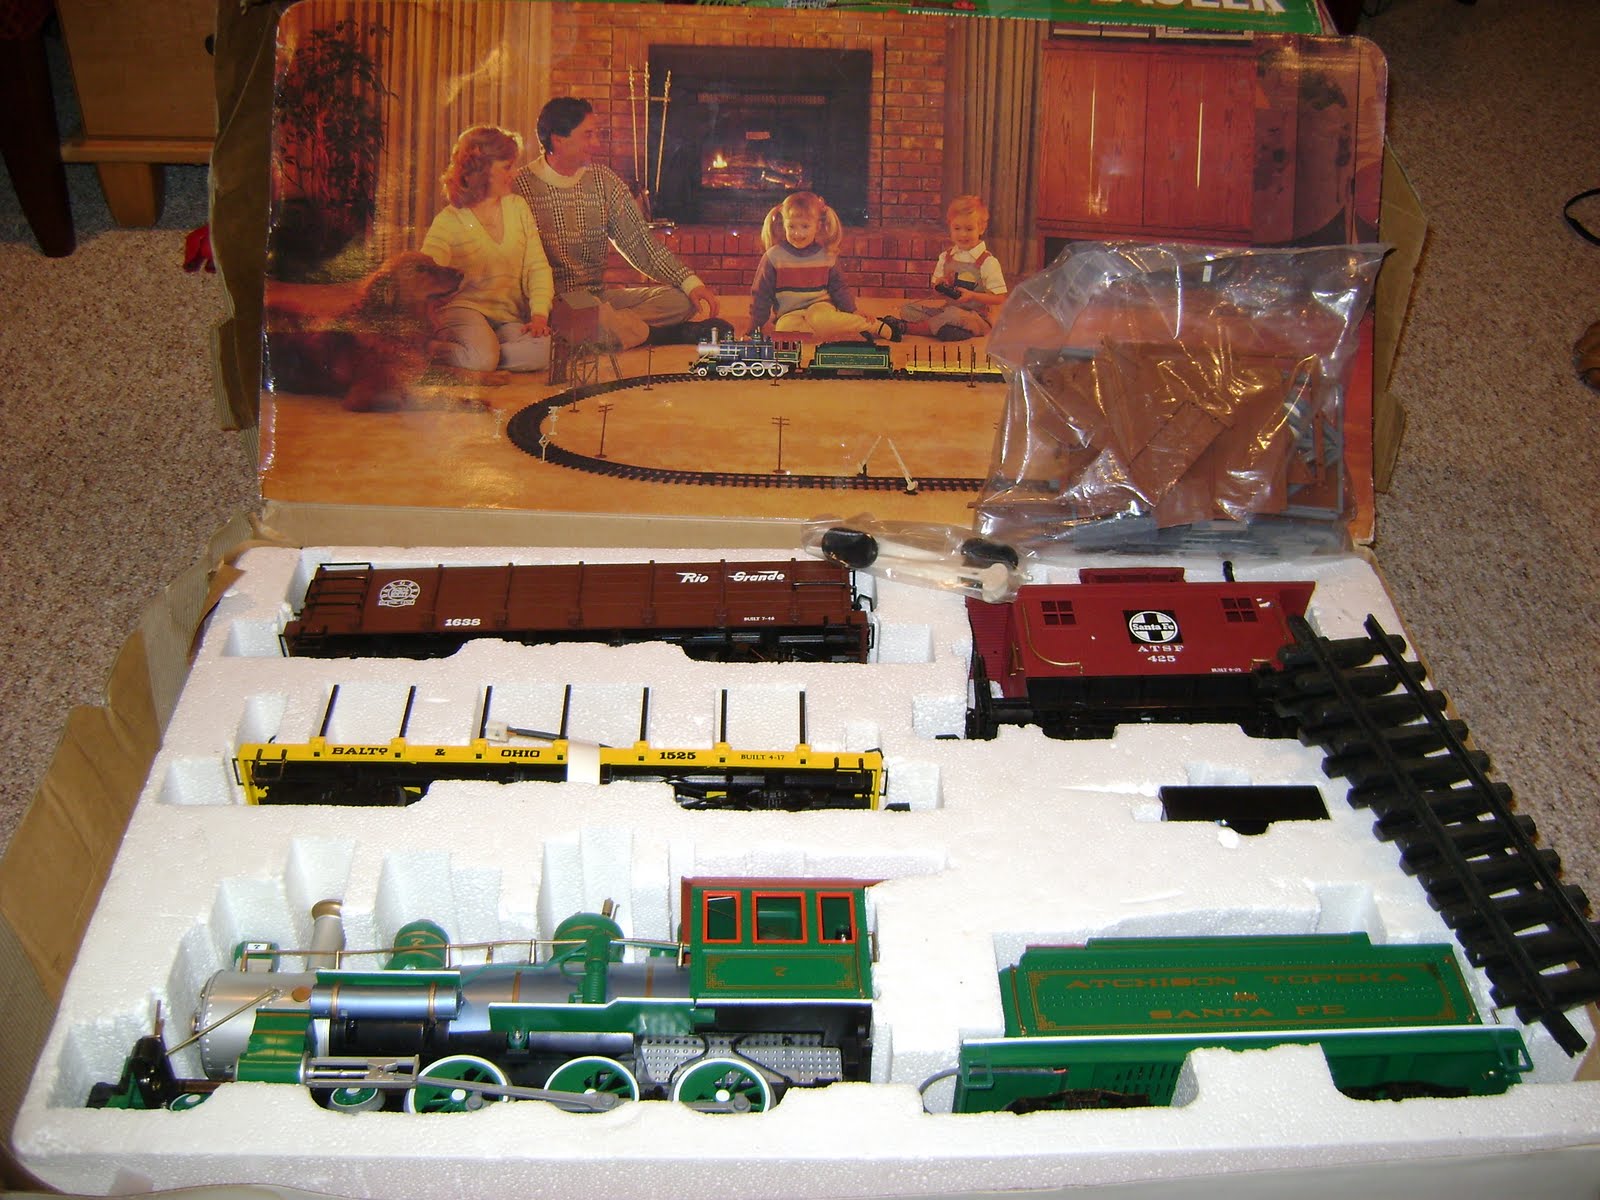  the track bachmann sets the standard in g scale trains the big hauler